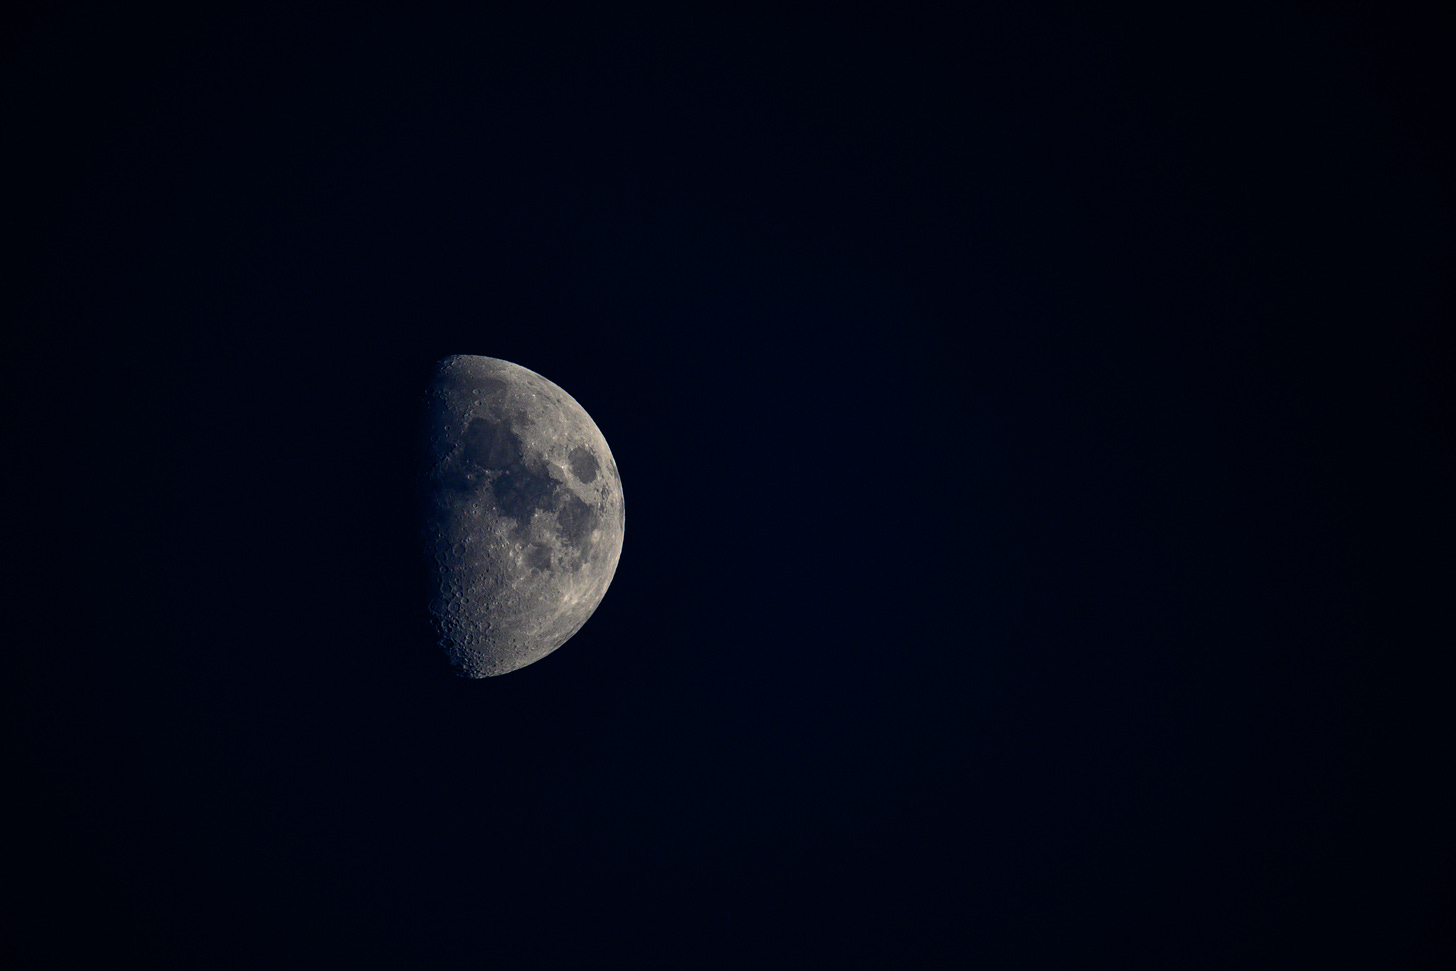 An image of the moon in a dark blue almost black sky with half of the moon not visible (the darker side of the moon).